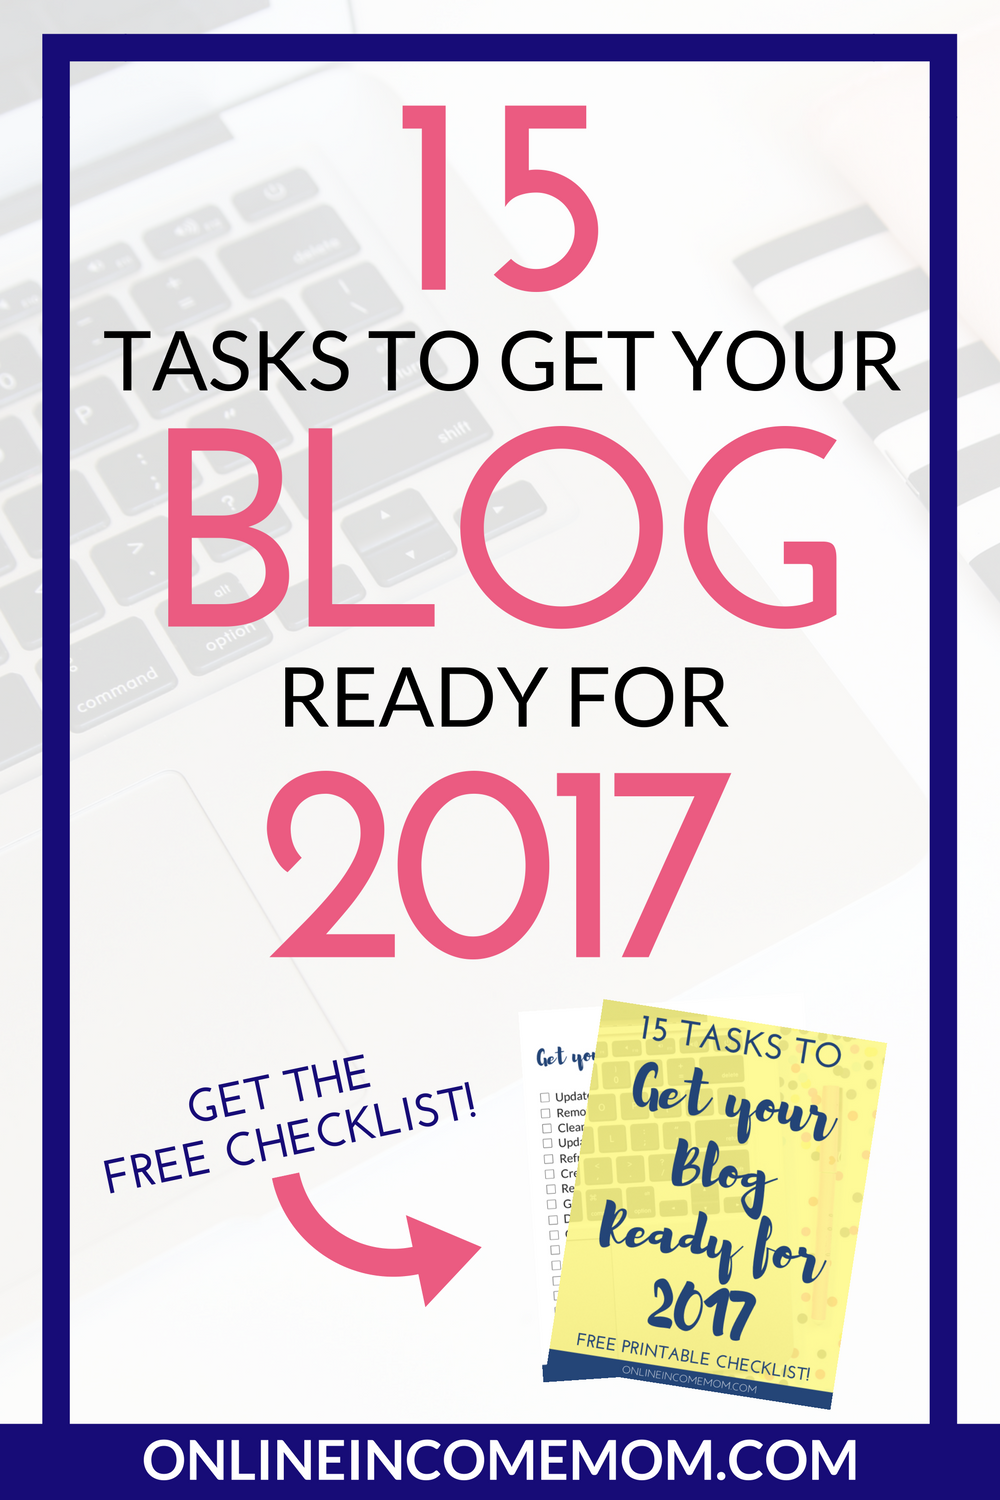 15-tasks-to-get-your-blog-ready-in-2017